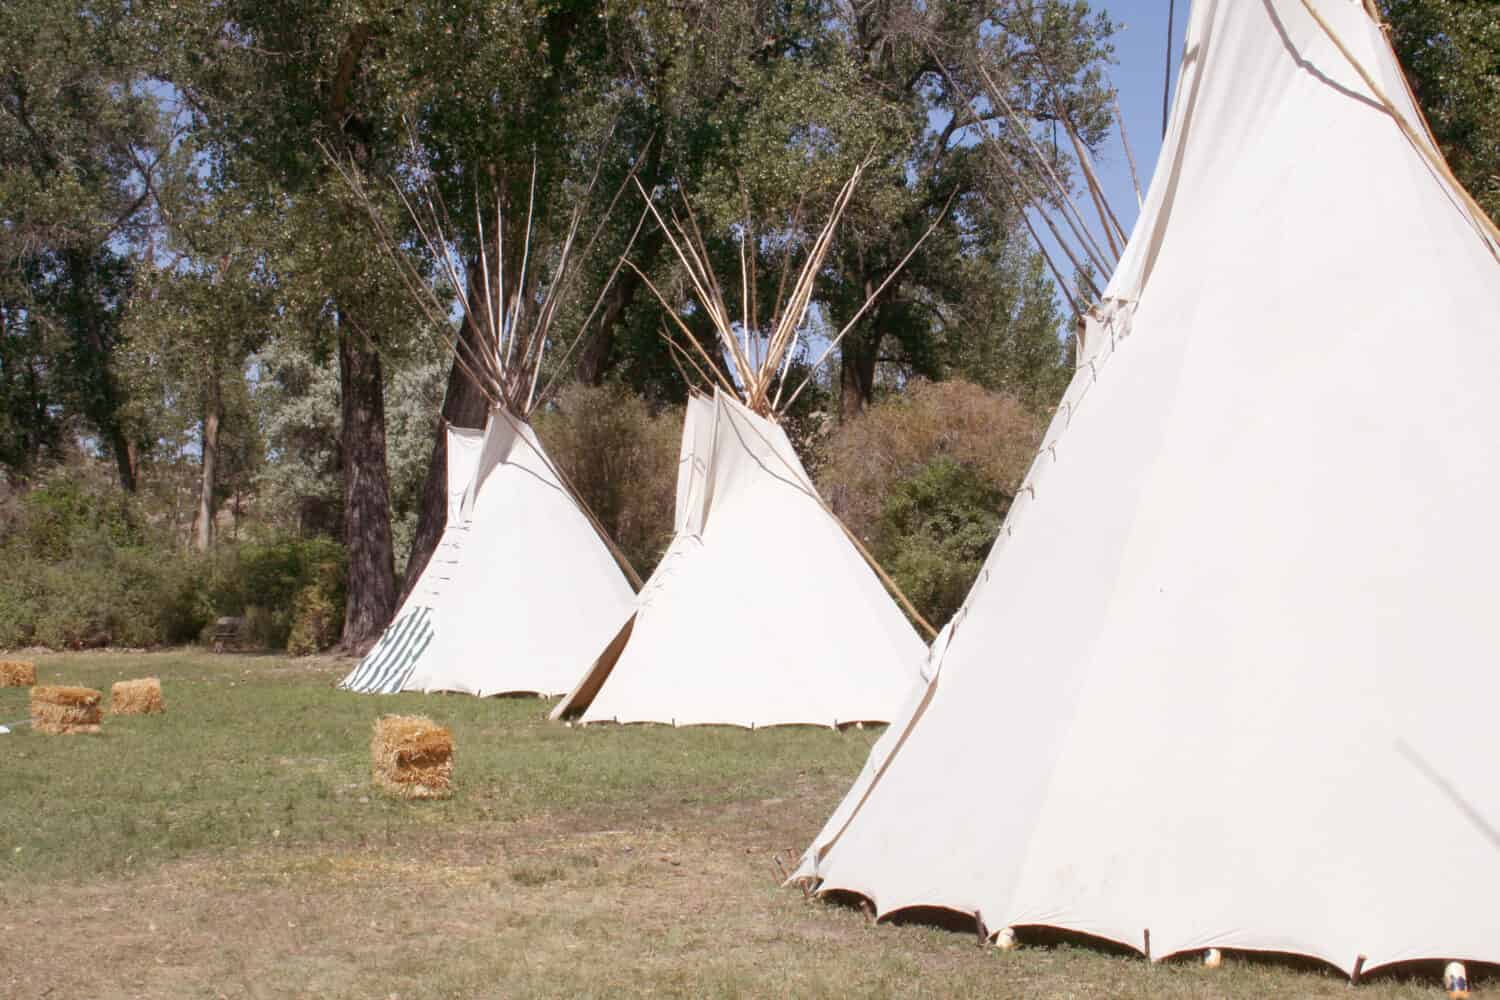 Sioux tipis in the Yellowstone Valley of Montana